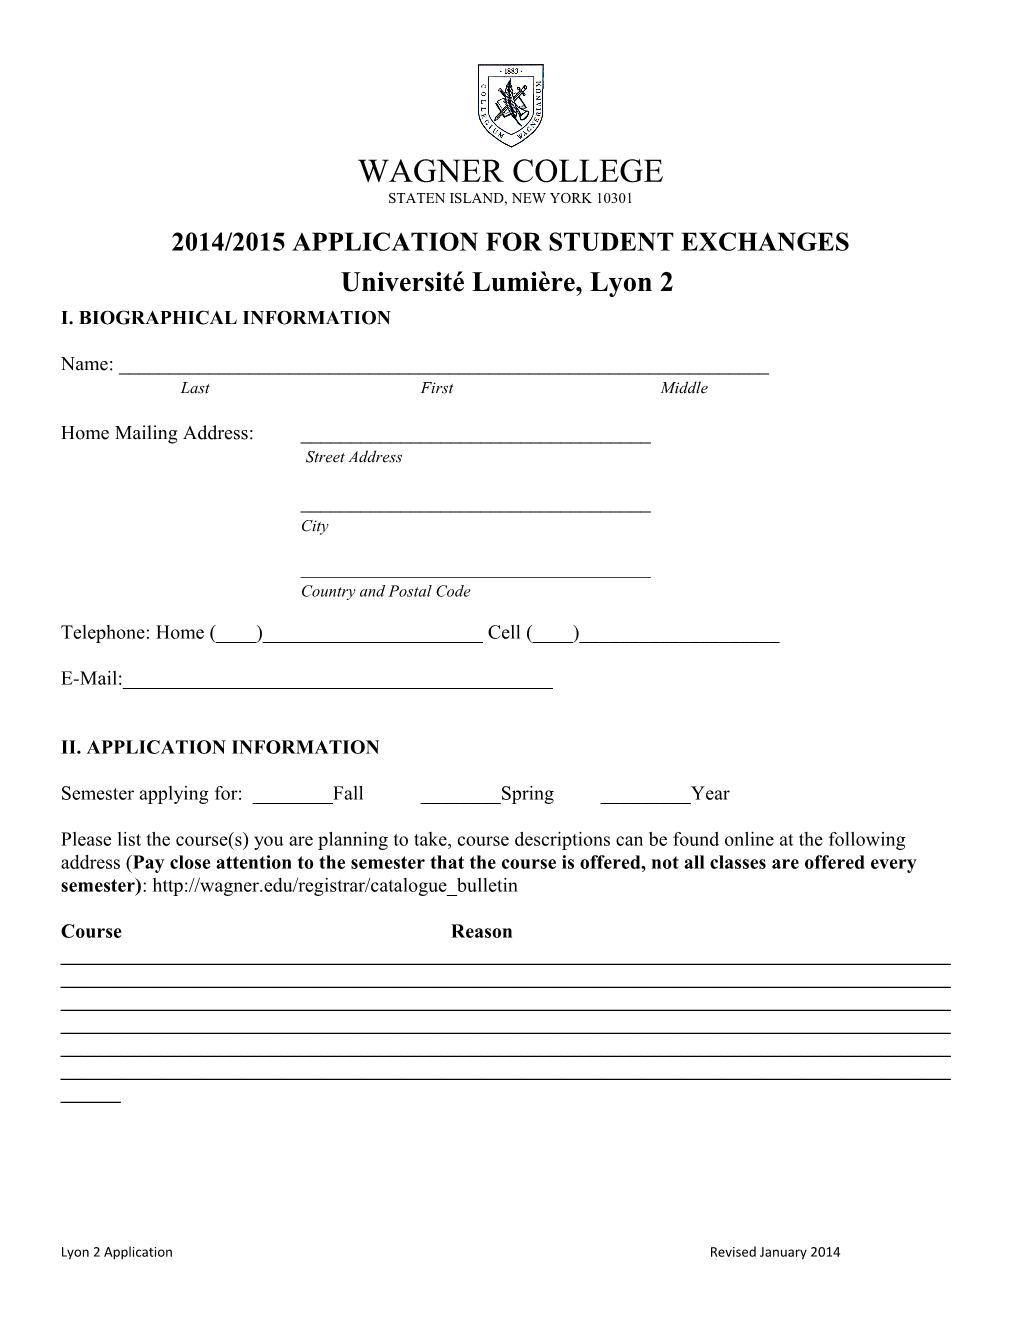 2014/2015Application for Student Exchanges